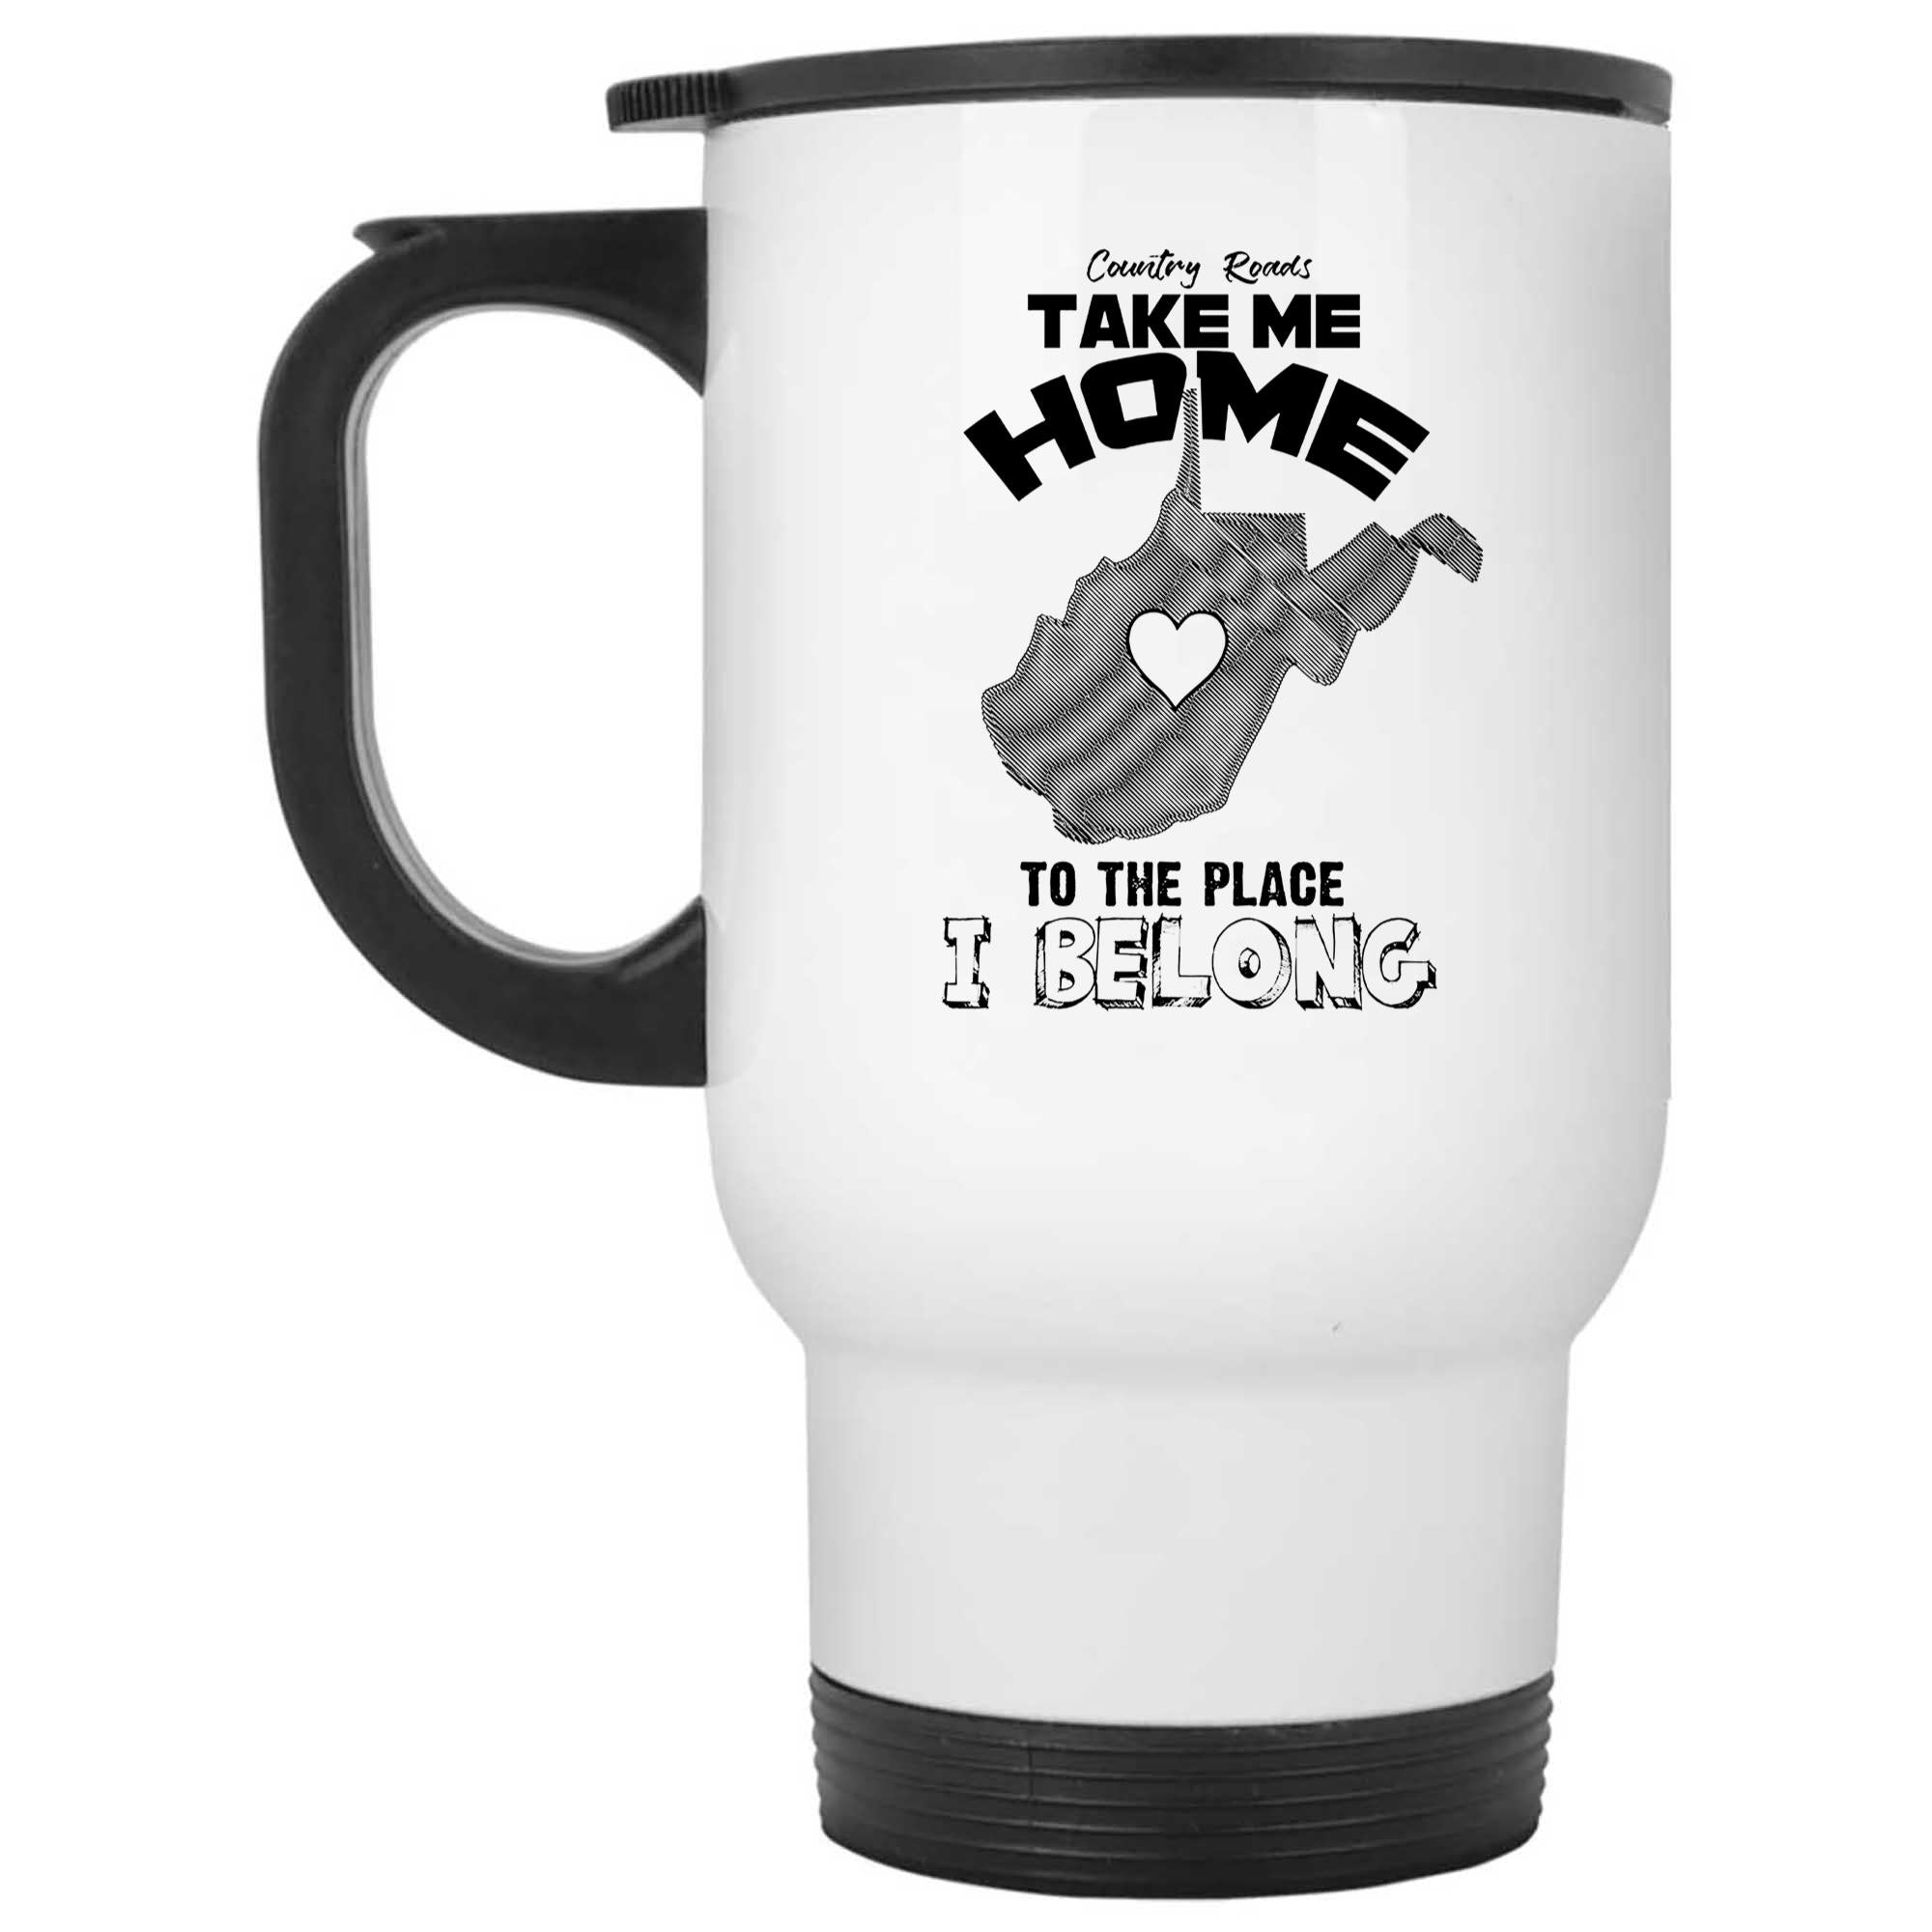 Skitongifts Funny Ceramic Novelty Coffee Mug Country Roads Take Me Home To The Place I Belong, State Wv For West Virginia Pride Dgfnbfq